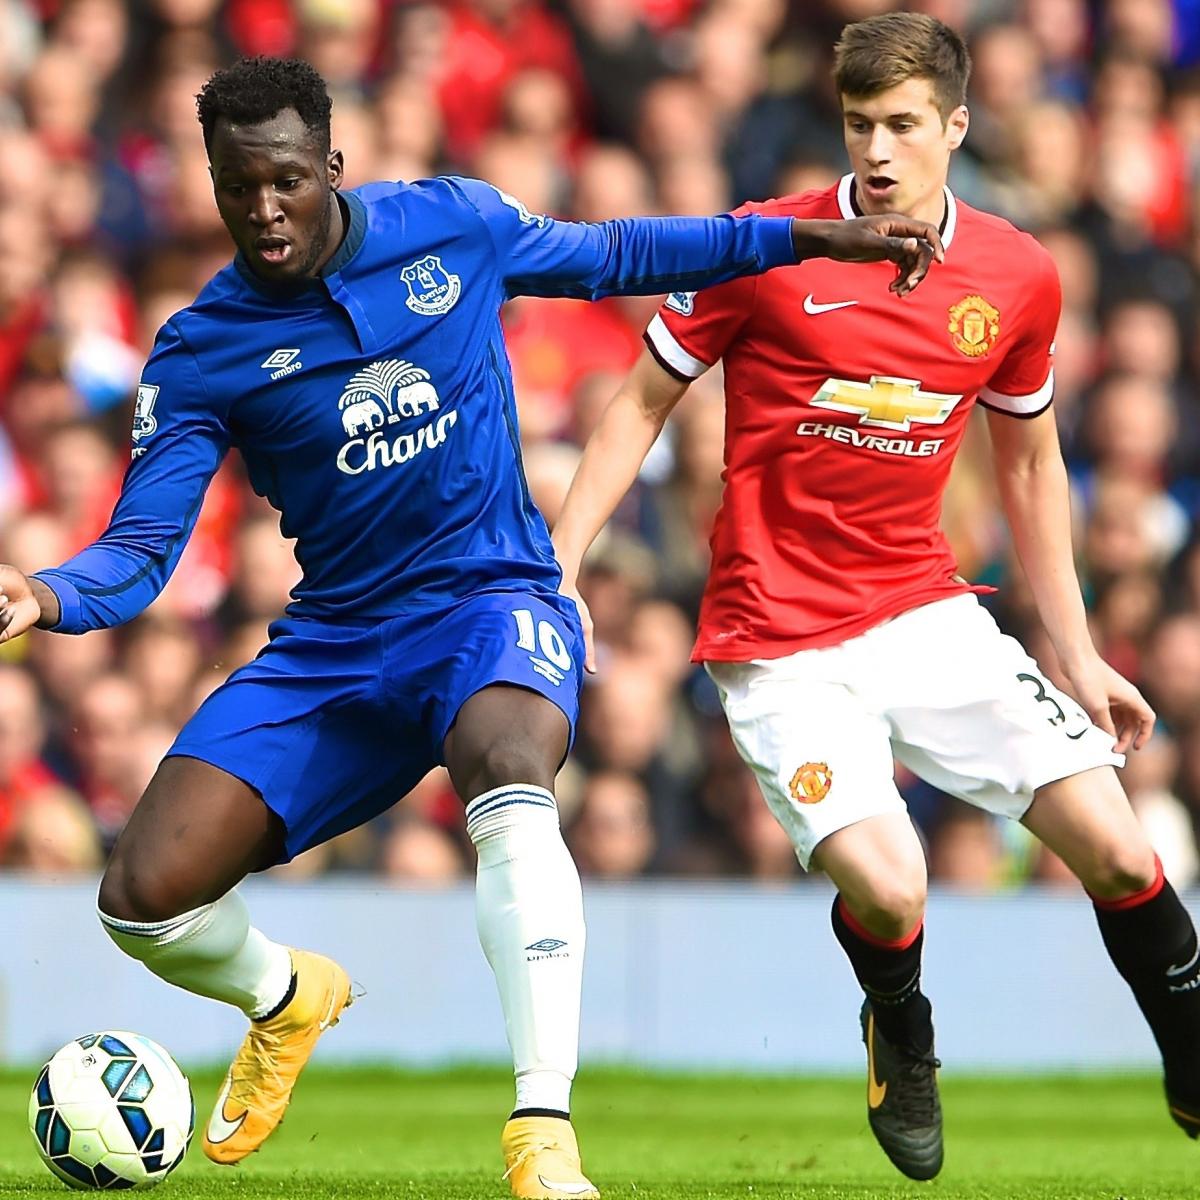 Manchester United vs. Everton: Live Score, Highlights from Premier